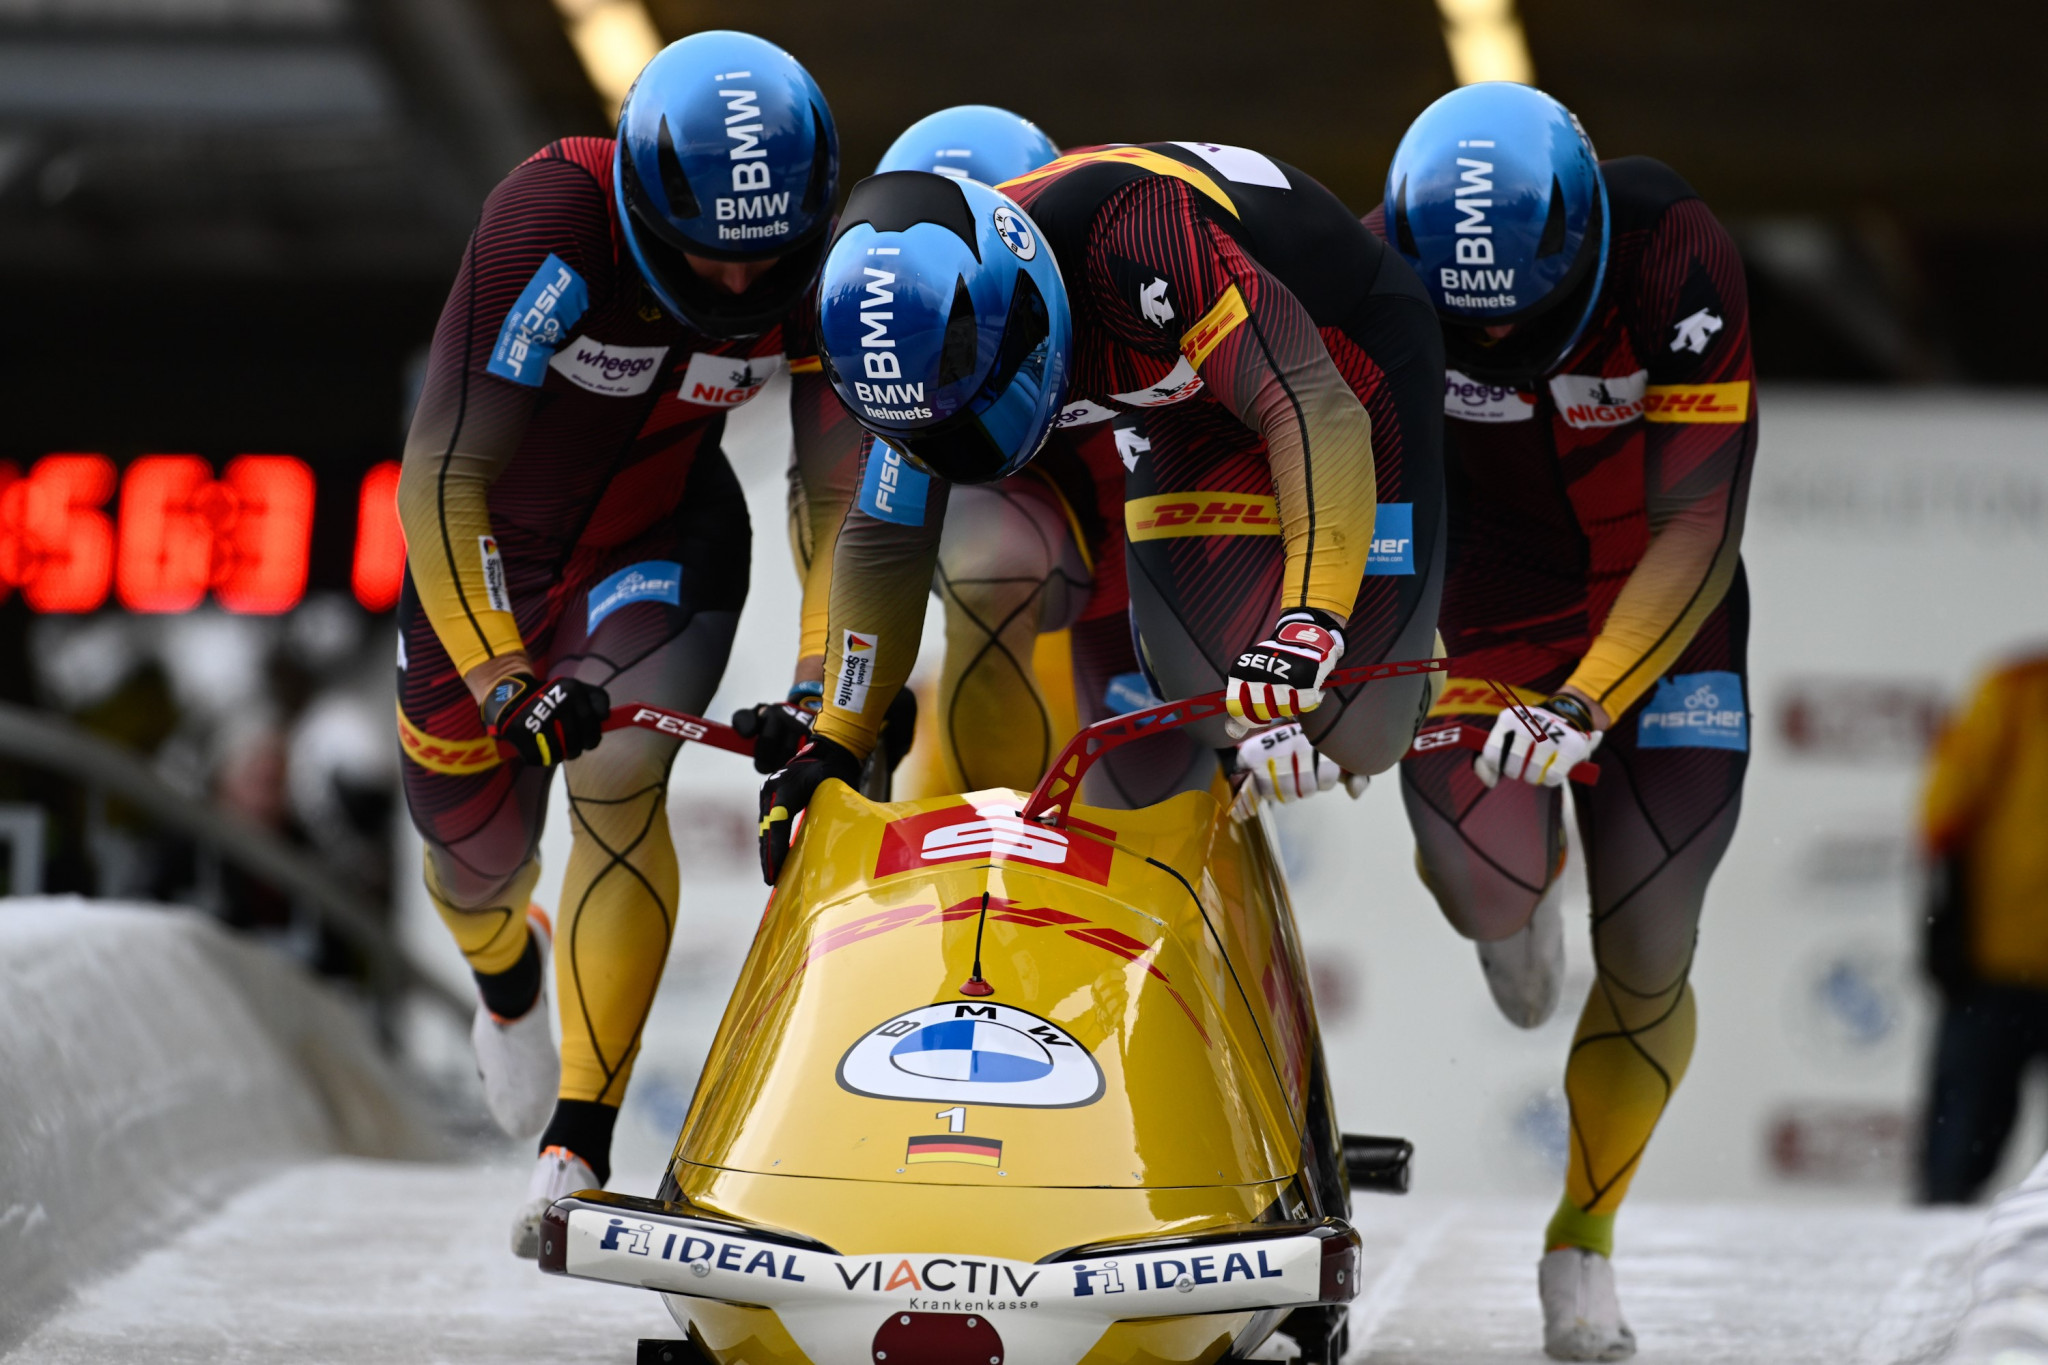 Germany's Francesco Friedrich took an outright four-man bobsleigh lead with one IBSF World Cup remaining after triumphing in Innsbruck ©IBSF